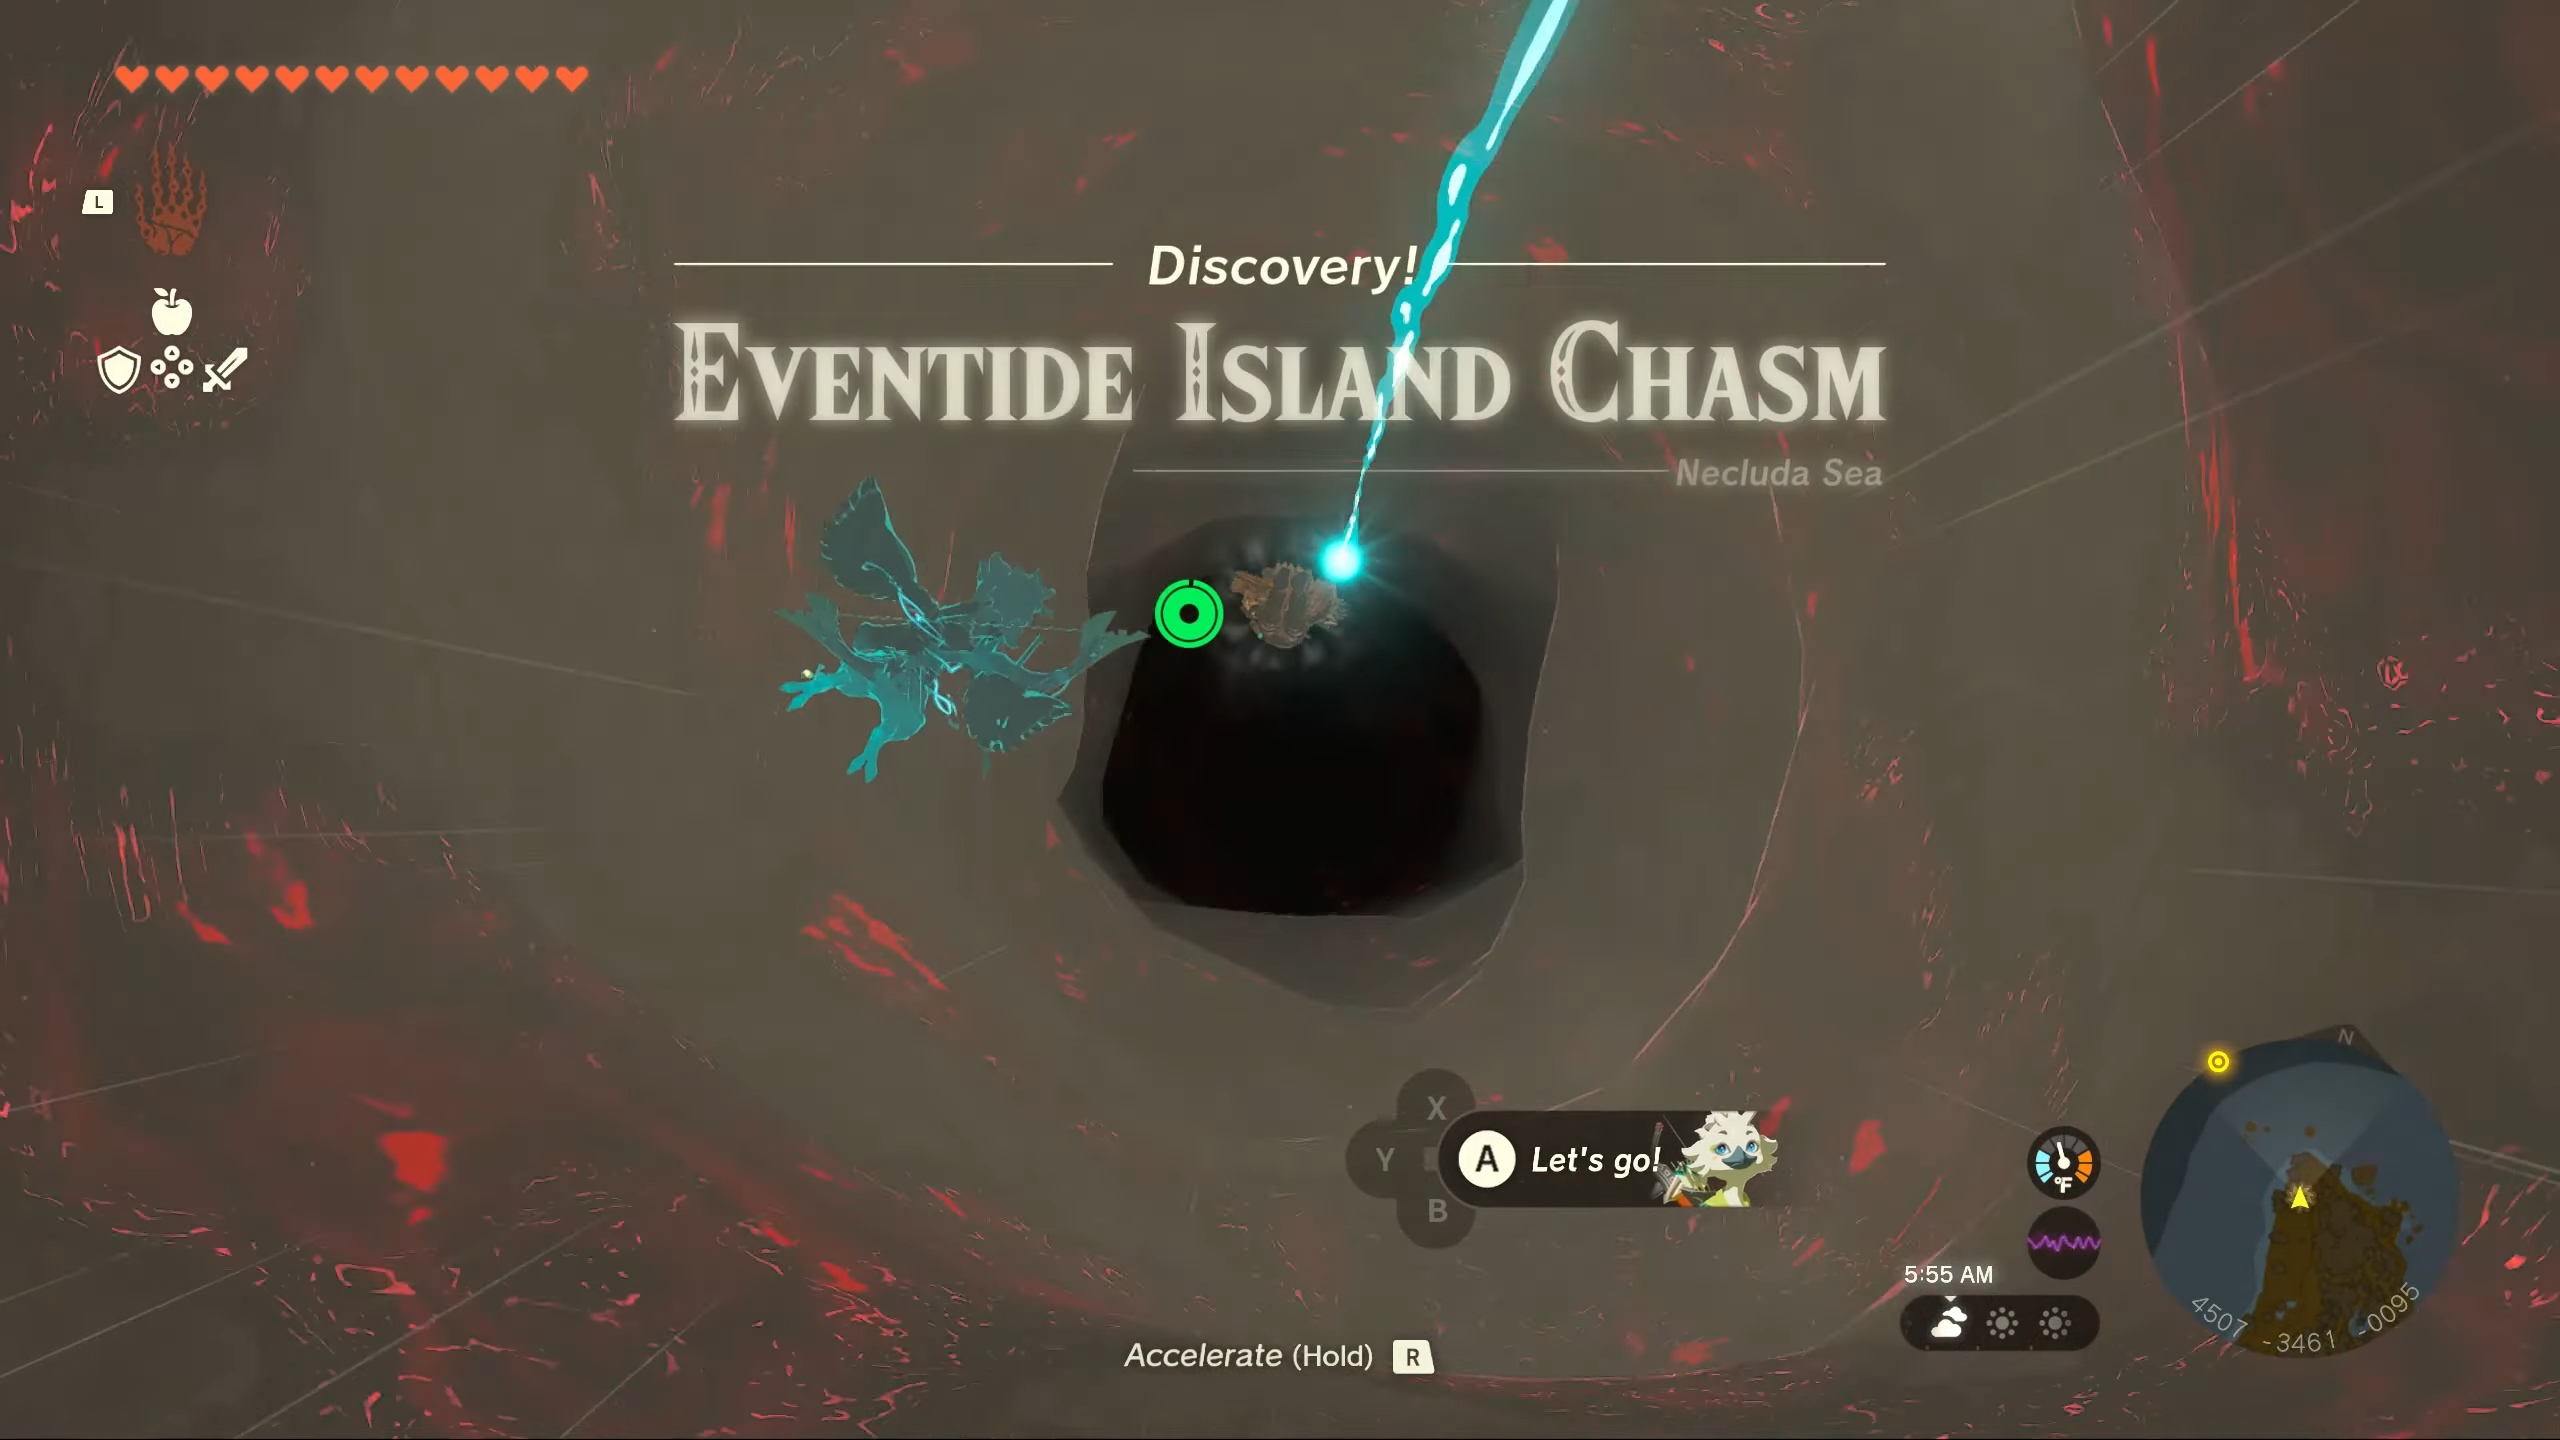 Link diving into the Eventide Island Chasm.